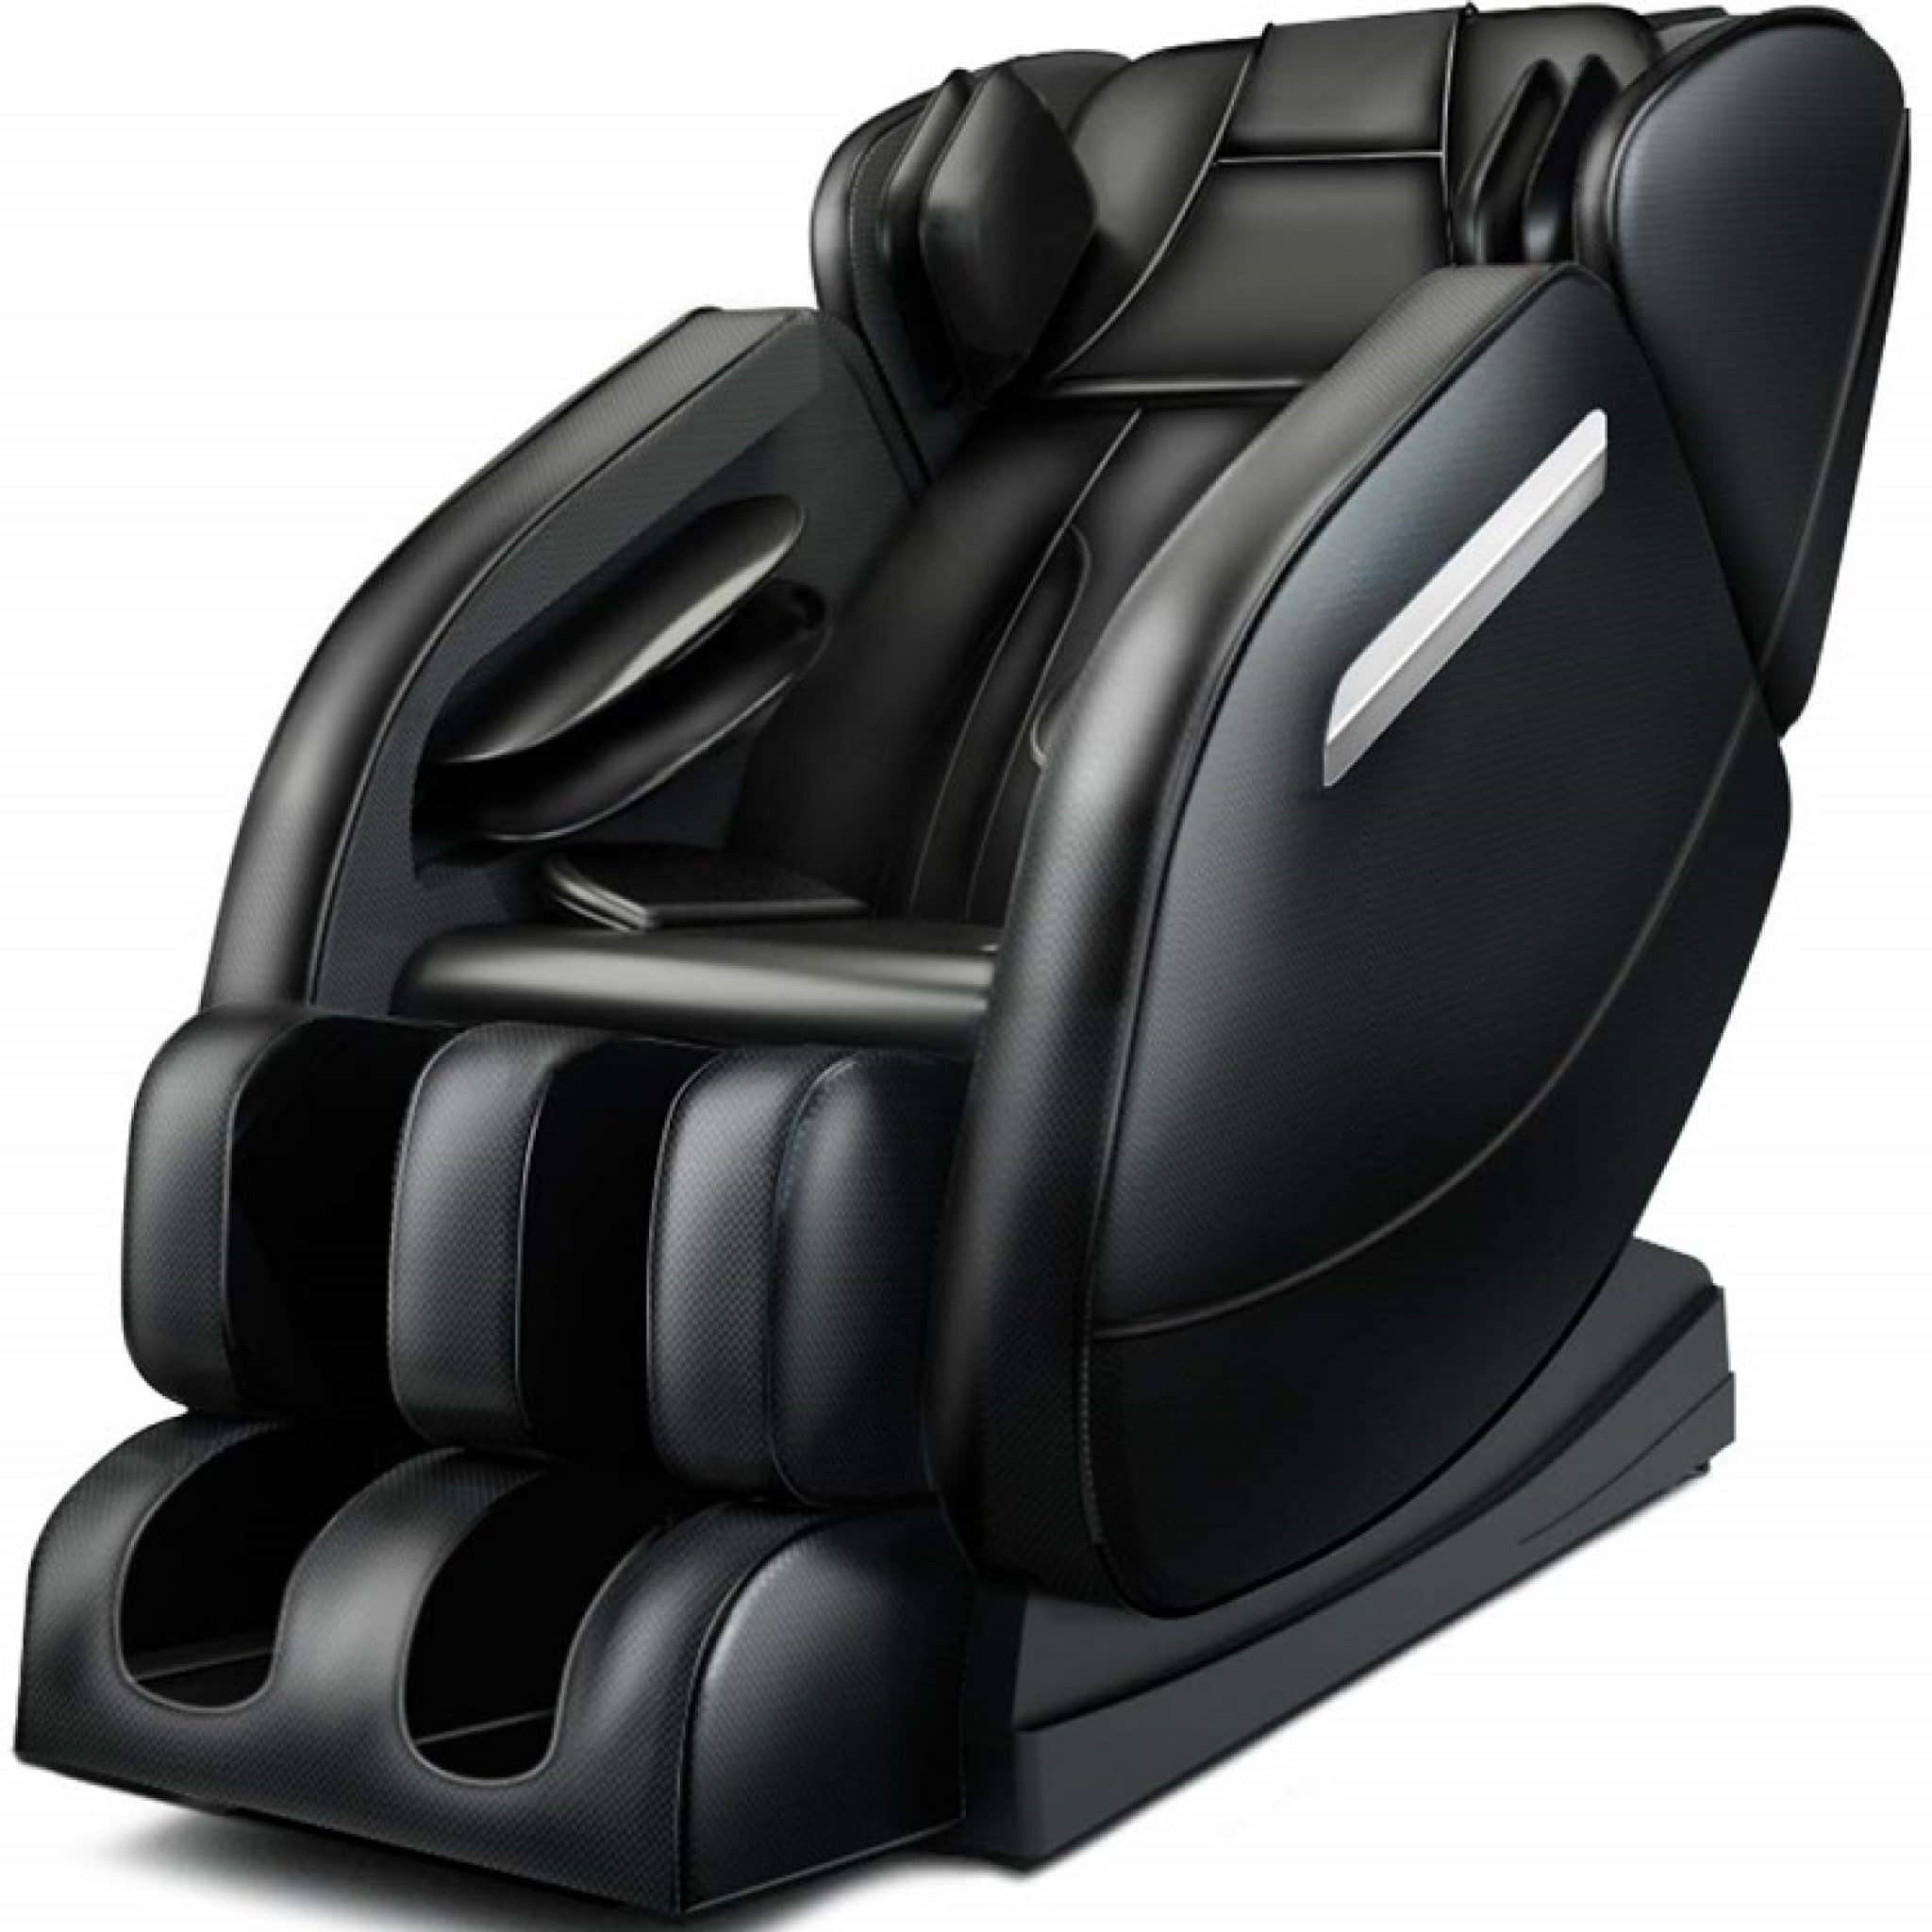 Best Massage Chairs Under 2000, 1000 And 500 Dollars In 2022